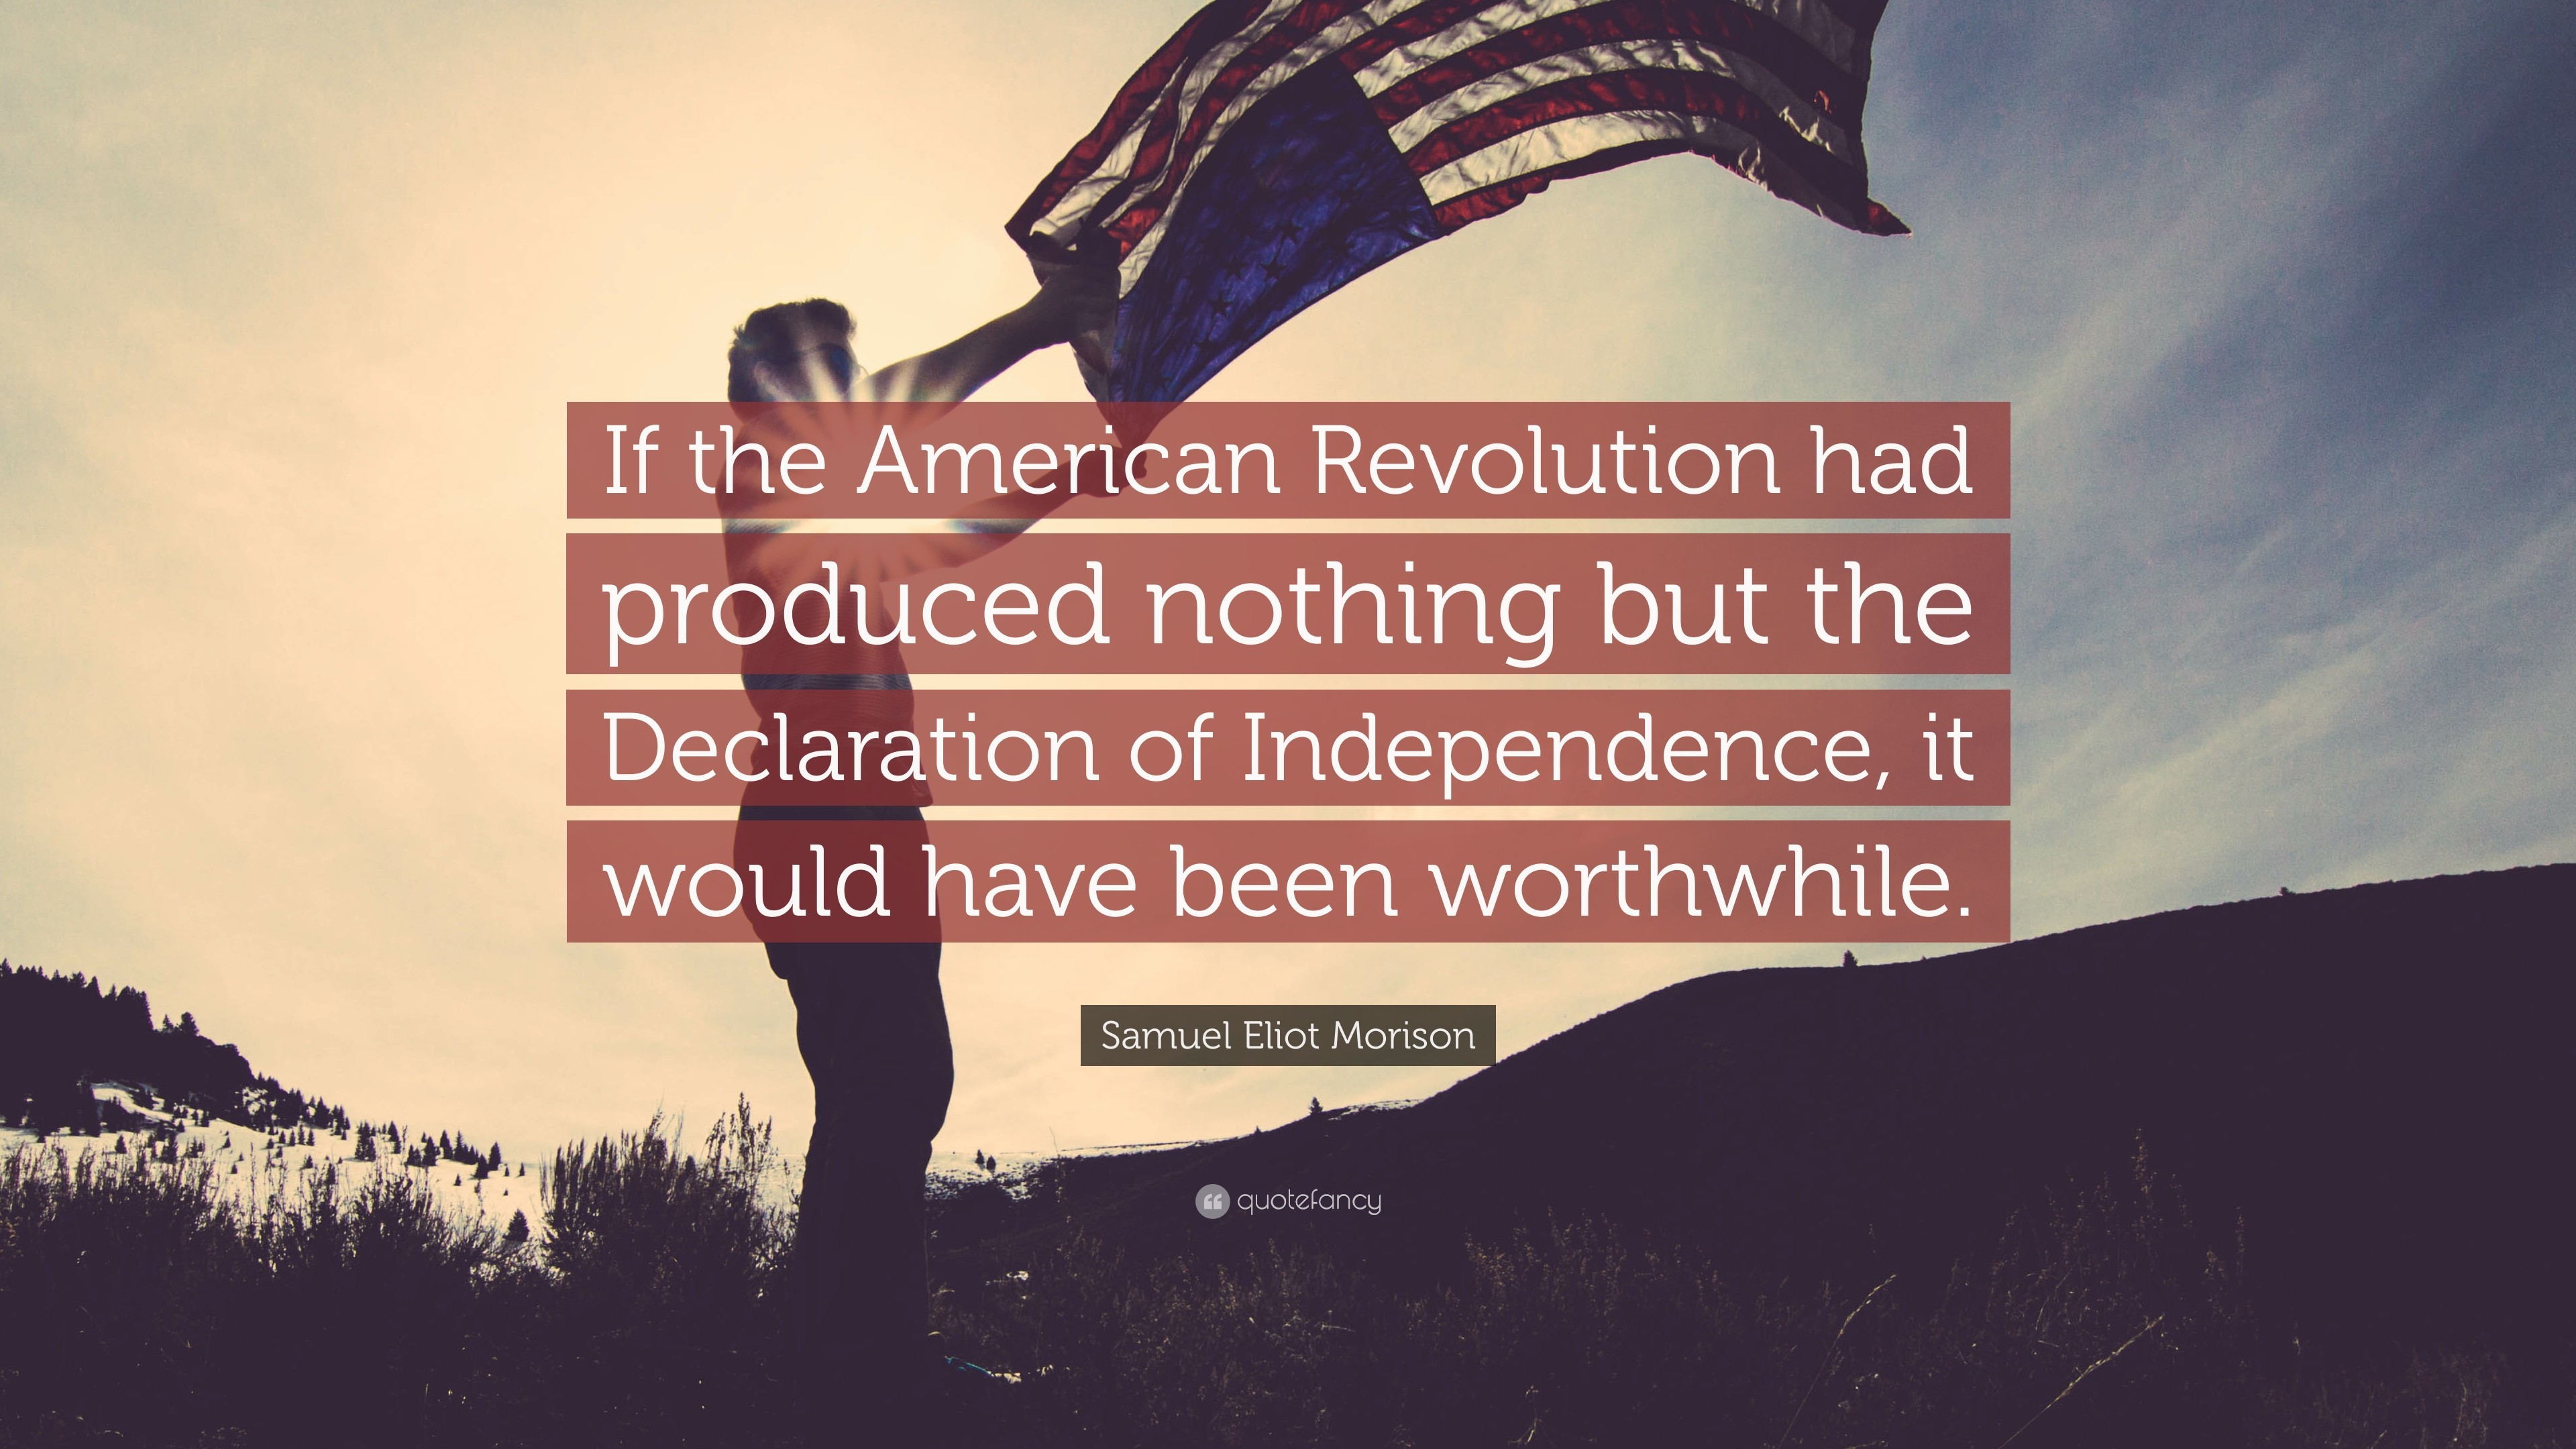 3840x2160 Samuel Eliot Morison Quote: “If the American Revolution had produced  nothing but the Declaration